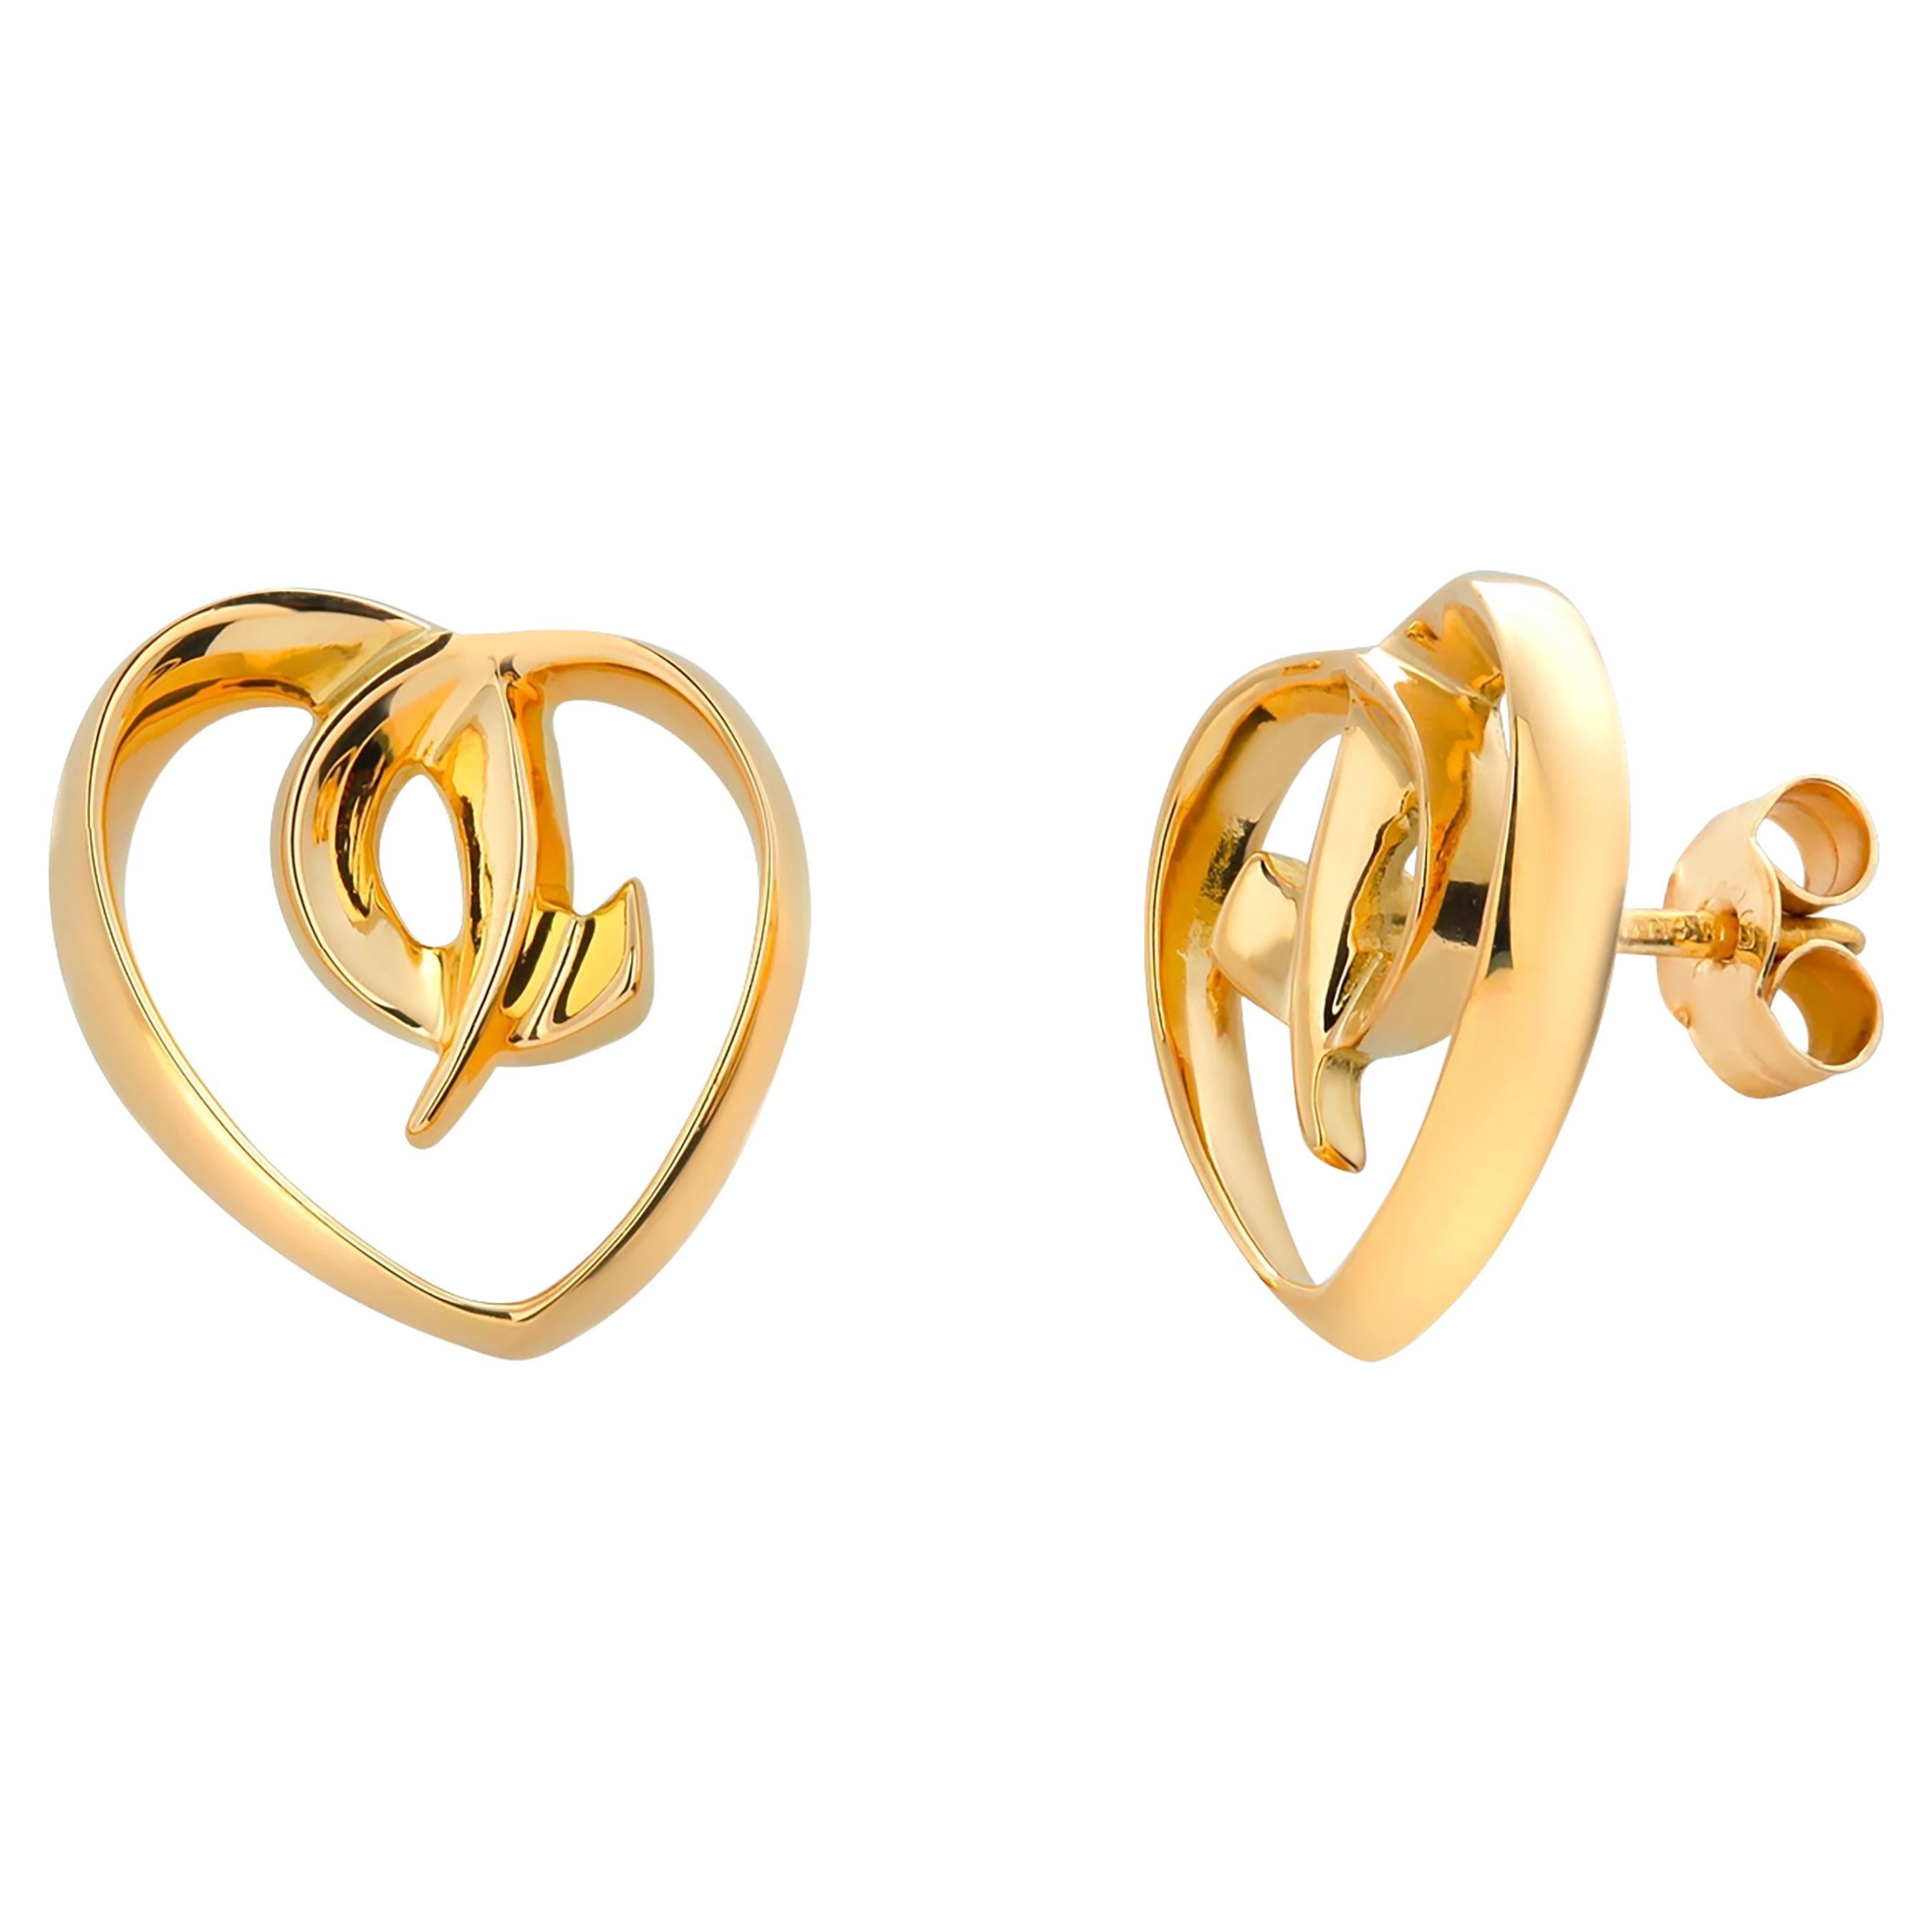 Paloma Picasso For Tiffany Co Open Heart Design 18 Karat Gold 0.60 Inch Earrings For Sale